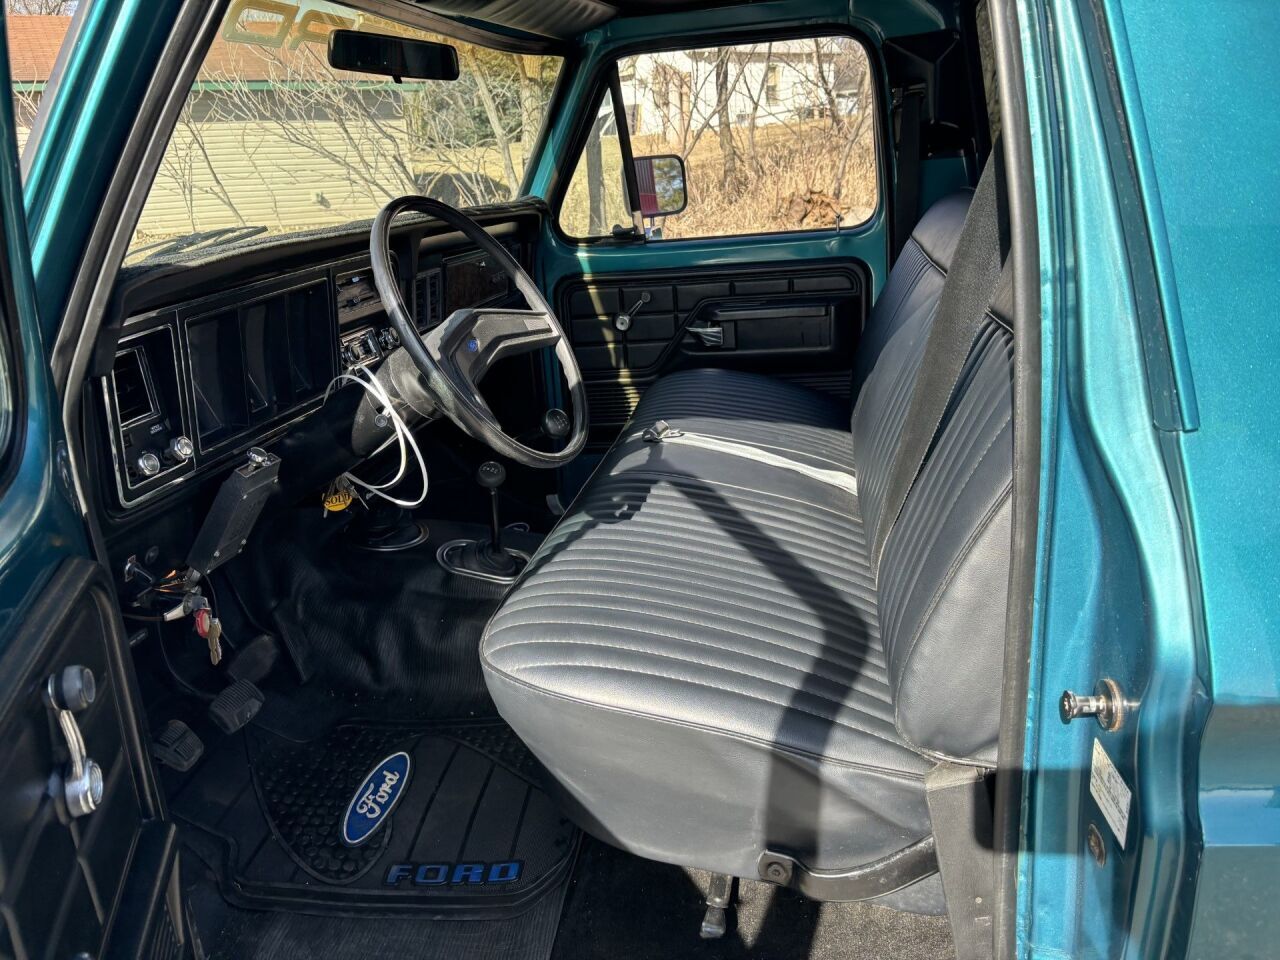 1979 Ford F-150 18